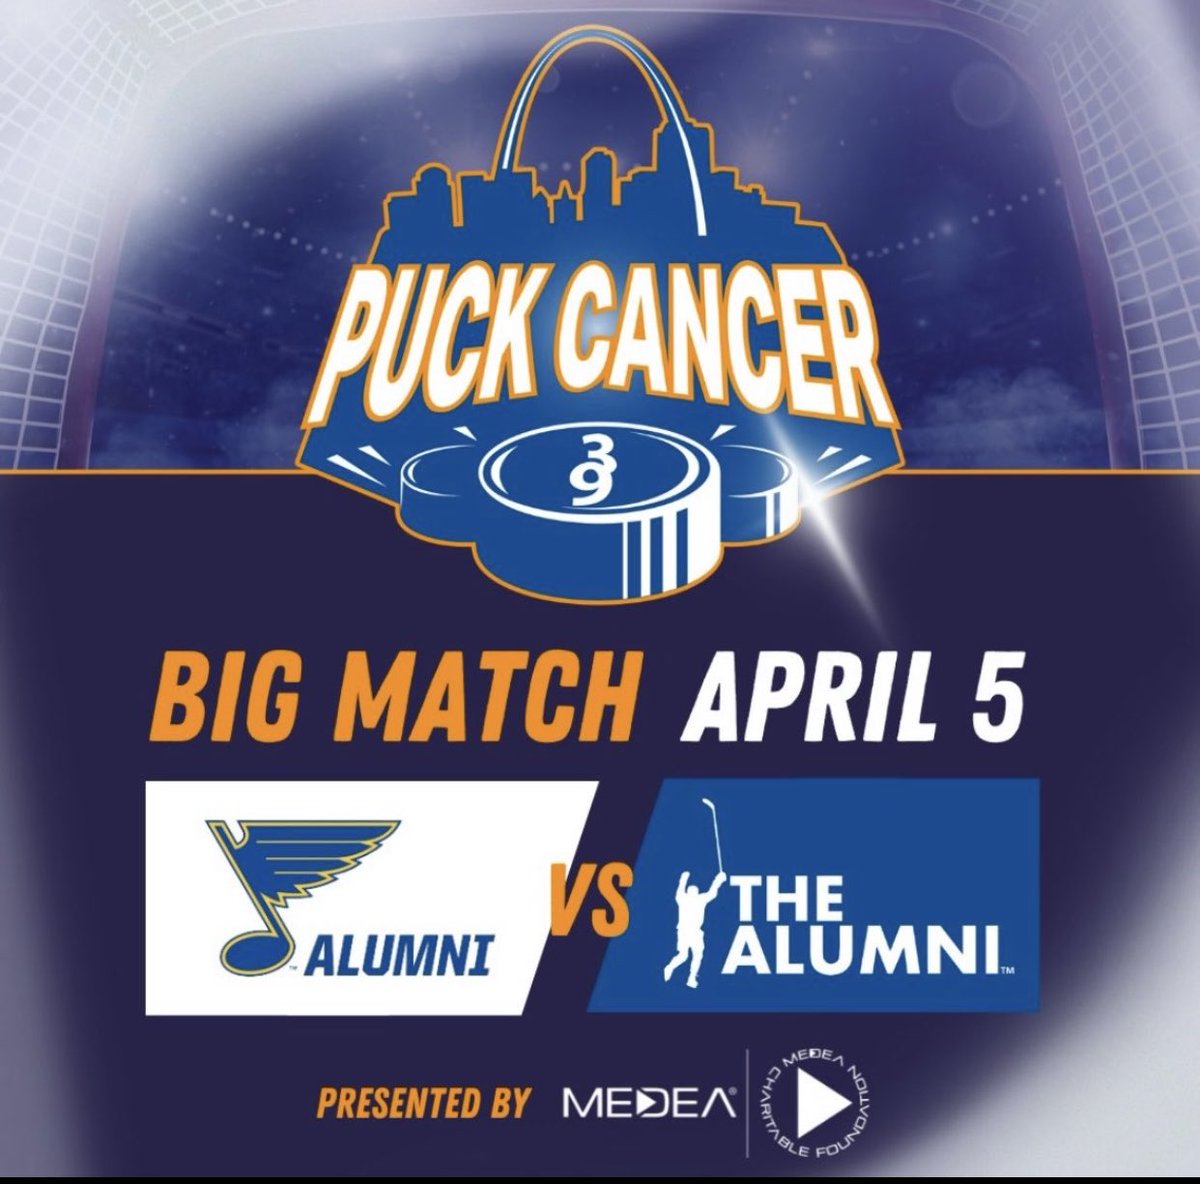 An incredible night this is going to be. My dear friend ⁦@Chasenpucks39⁩ who is battling Leukemia is raising money for the ⁦@SitemanCenter⁩ Incredible lineup including Chris Chelios, Eddie Belfour, Dirks Bentley and many more. Get your tickets! ⁦@bluesalumni⁩